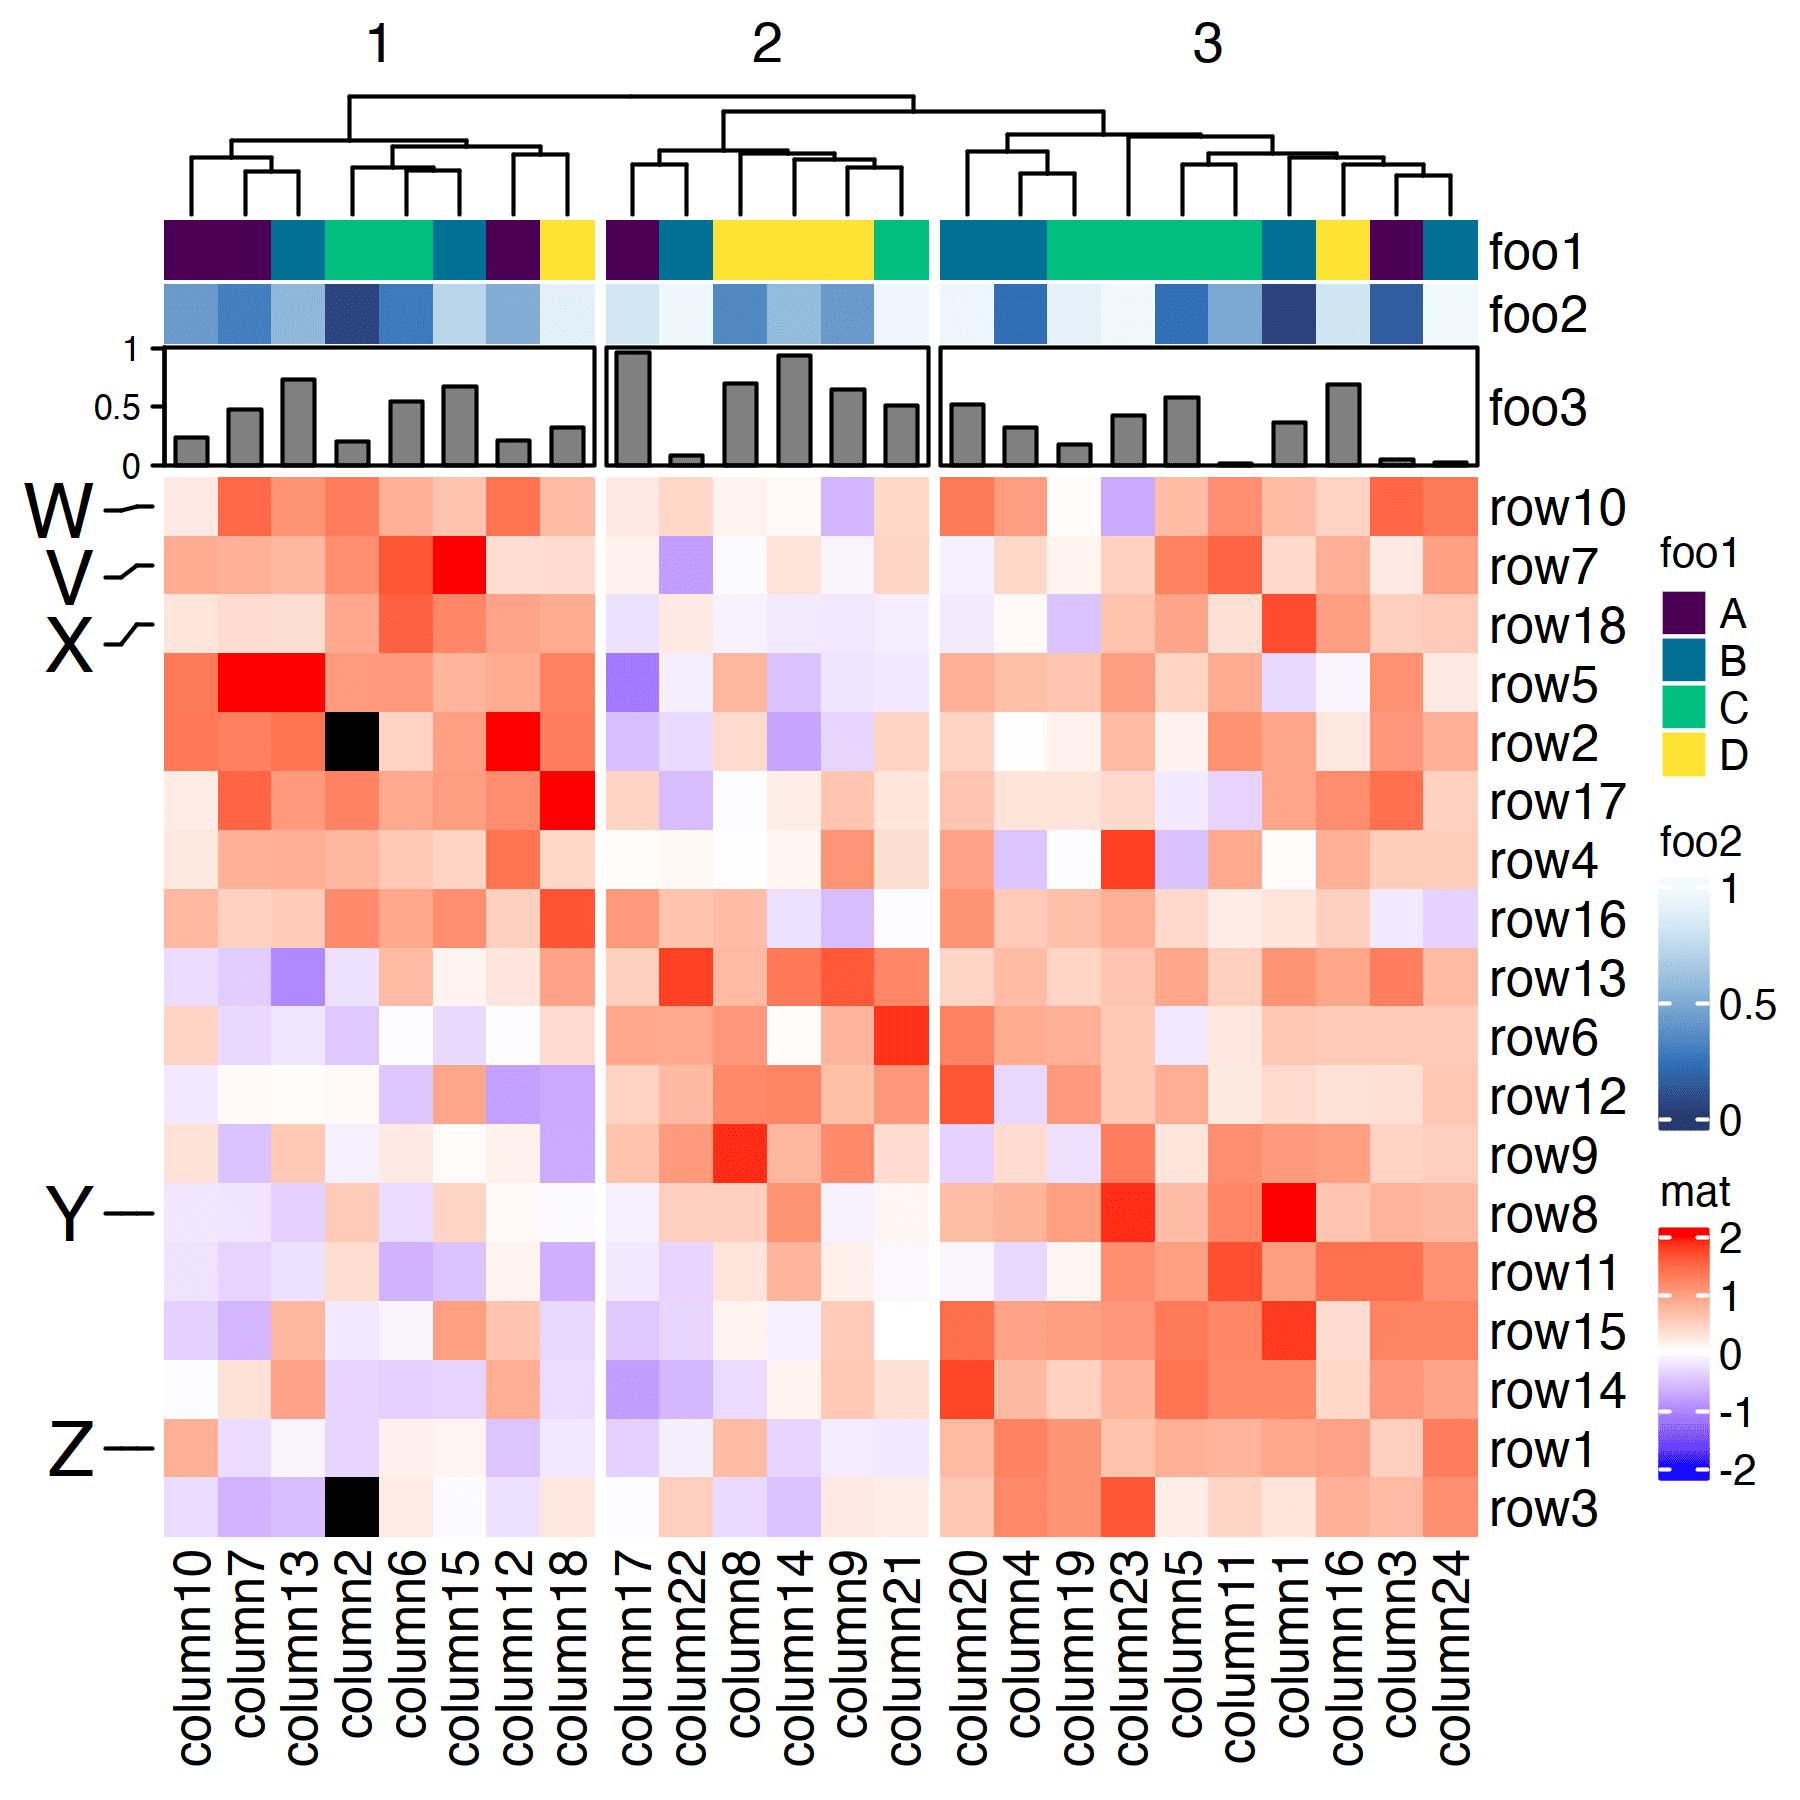 The second heatmap example generated by ComplexHeatmap, which added row and column annotations and split the heatmap columns into groups based on the column dendogram